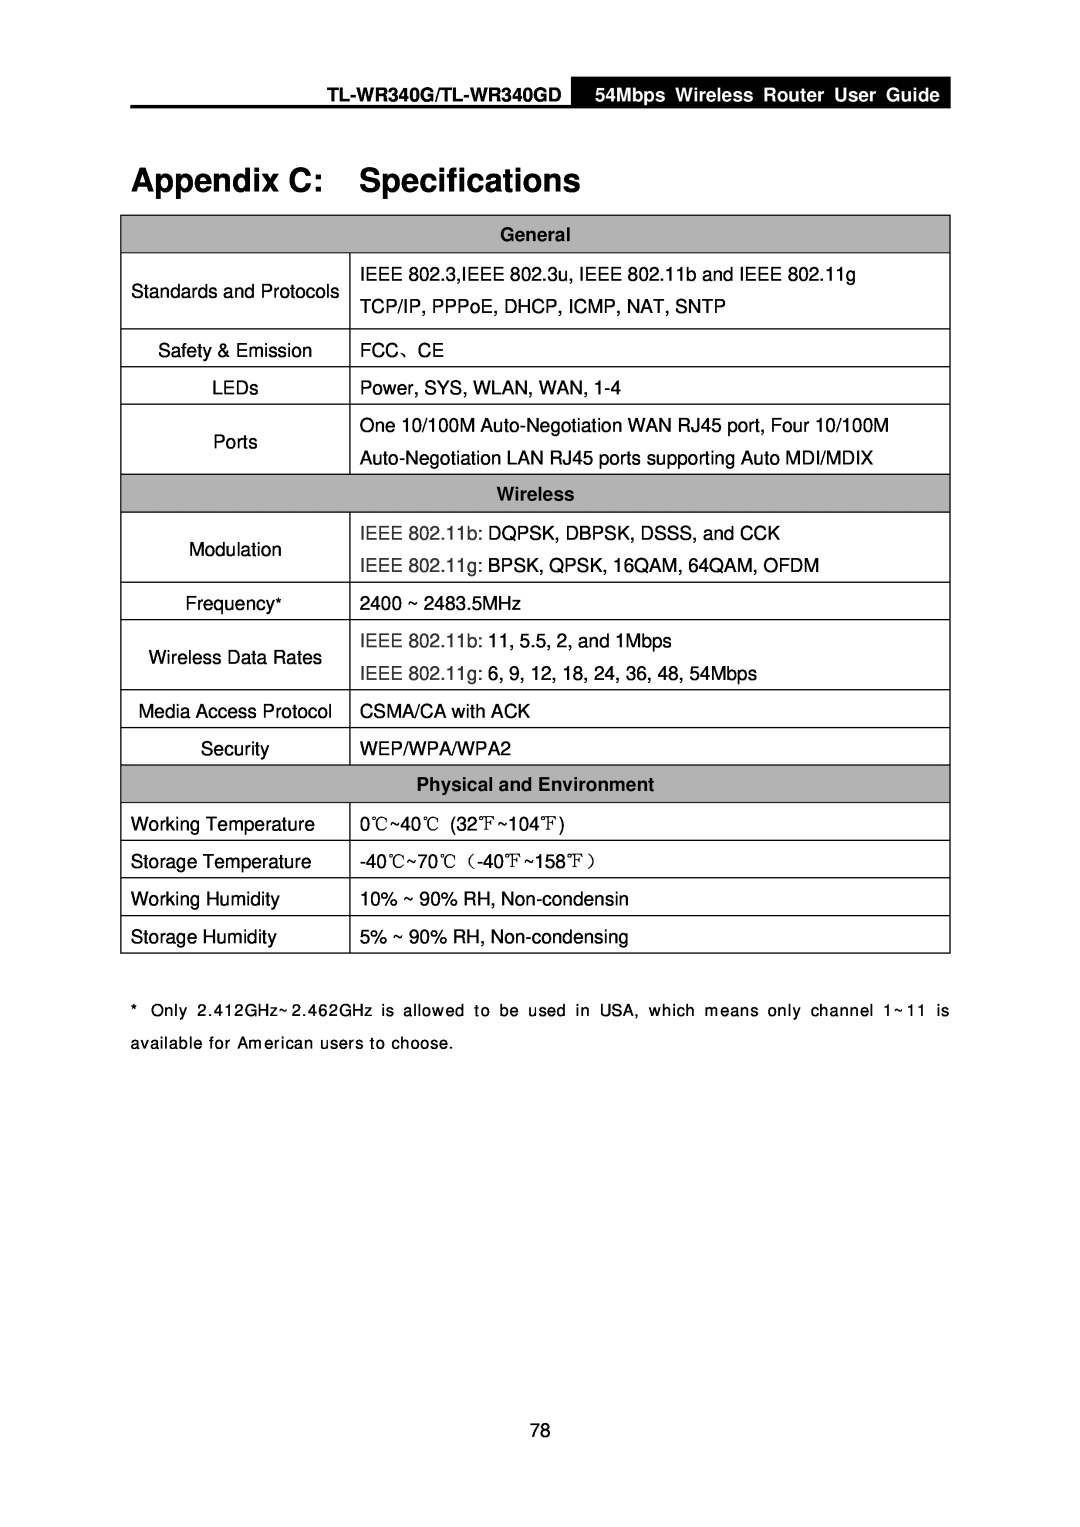 TP-Link Appendix C, Specifications, TL-WR340G/TL-WR340GD, 54Mbps Wireless Router User Guide, Physical and Environment 